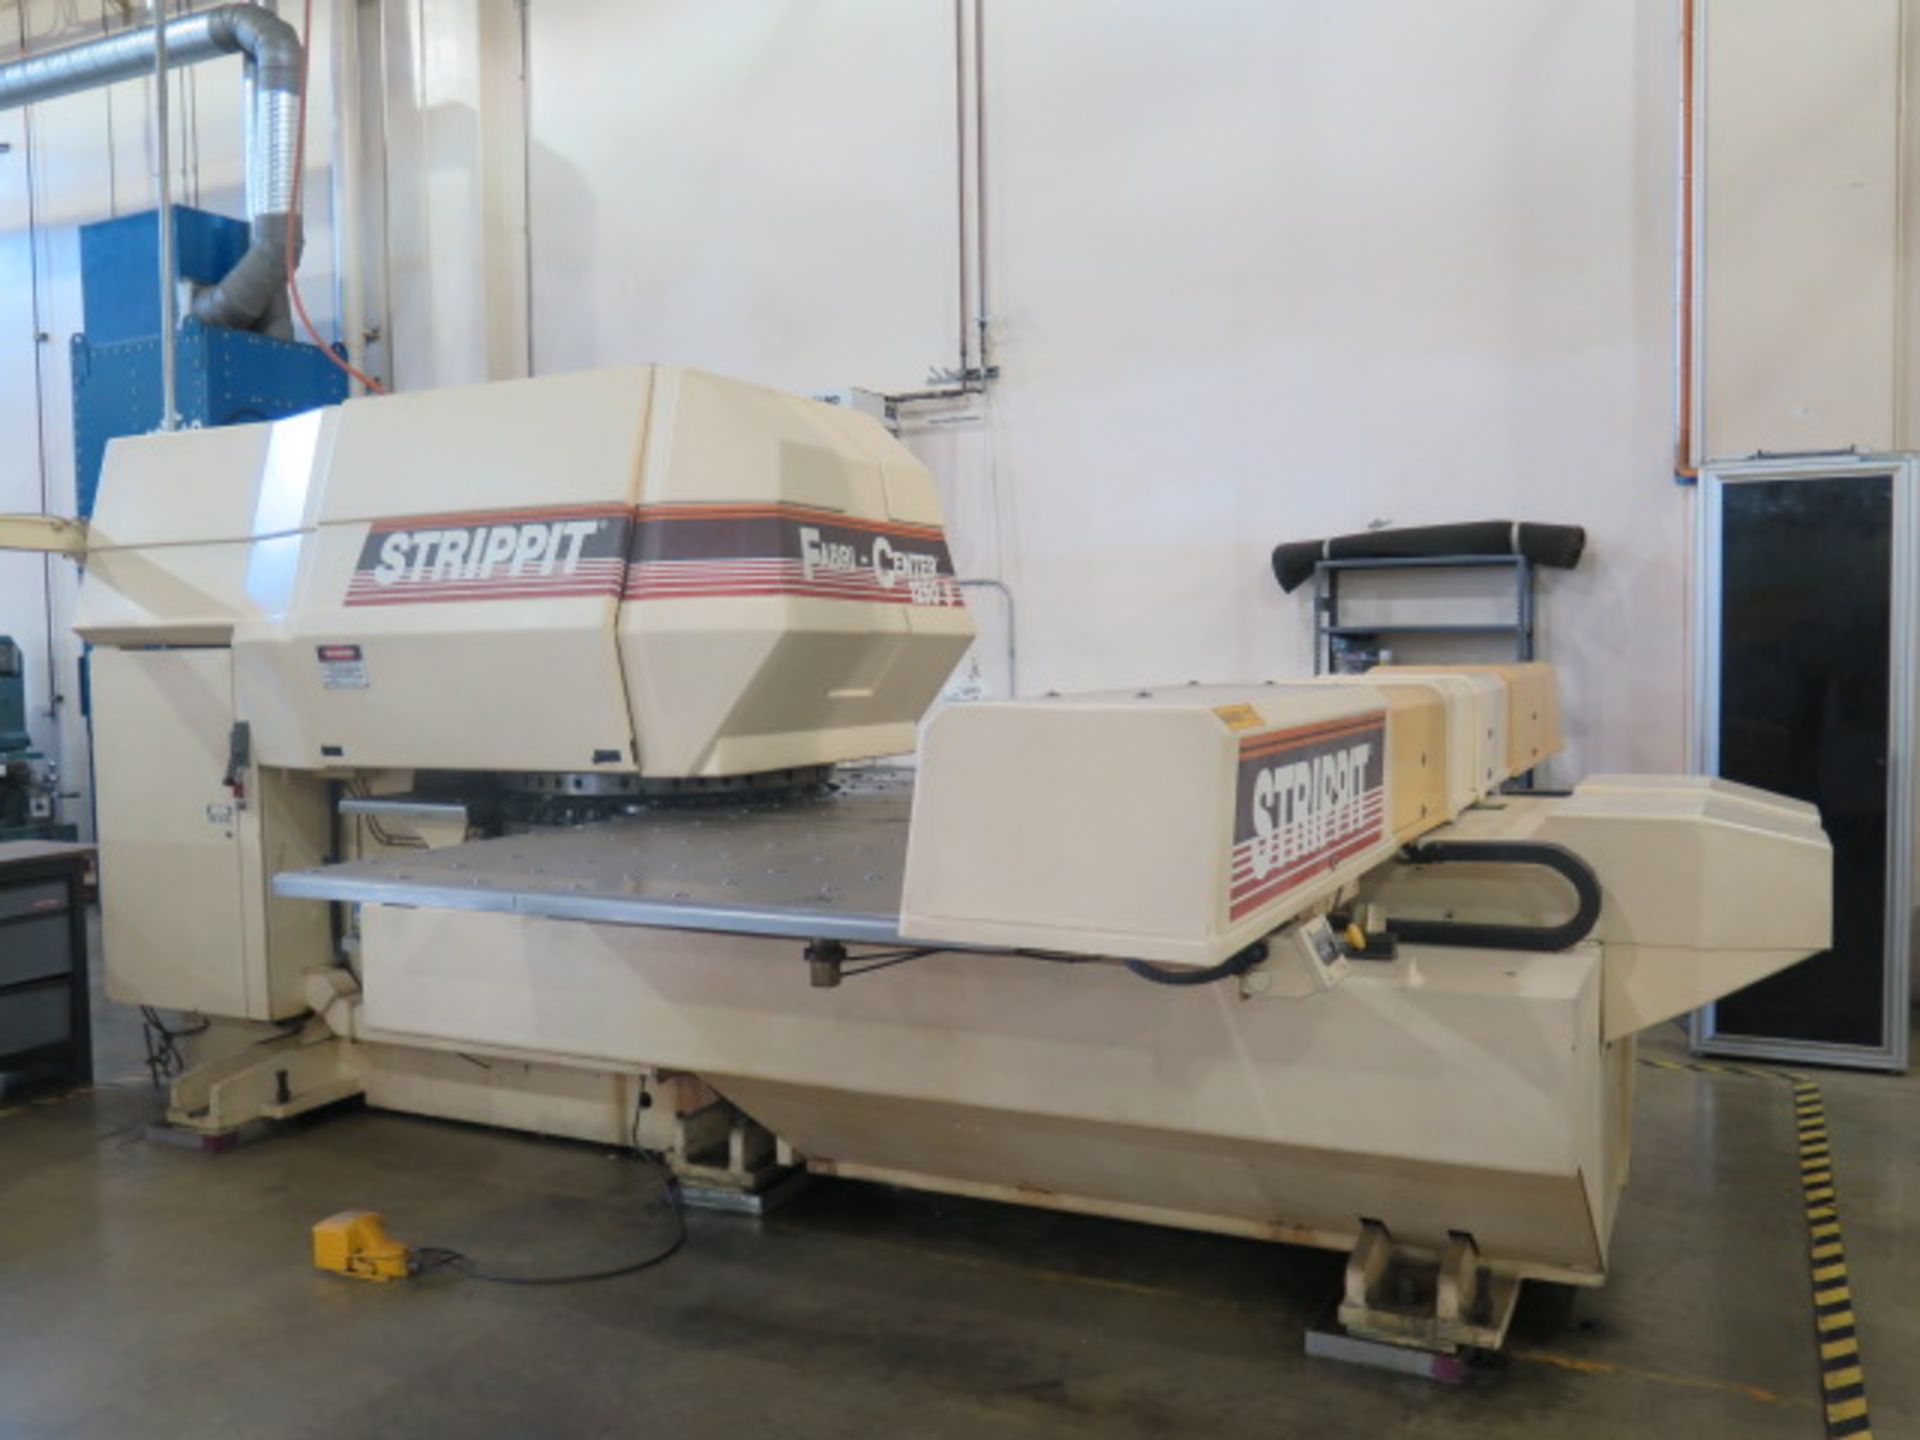 Strippit 1250S “Fabri-Center” 33 Ton CNC Turret Punch Press s/n 1031042490 w/ Fanuc 0P, SOLD AS IS - Image 2 of 14